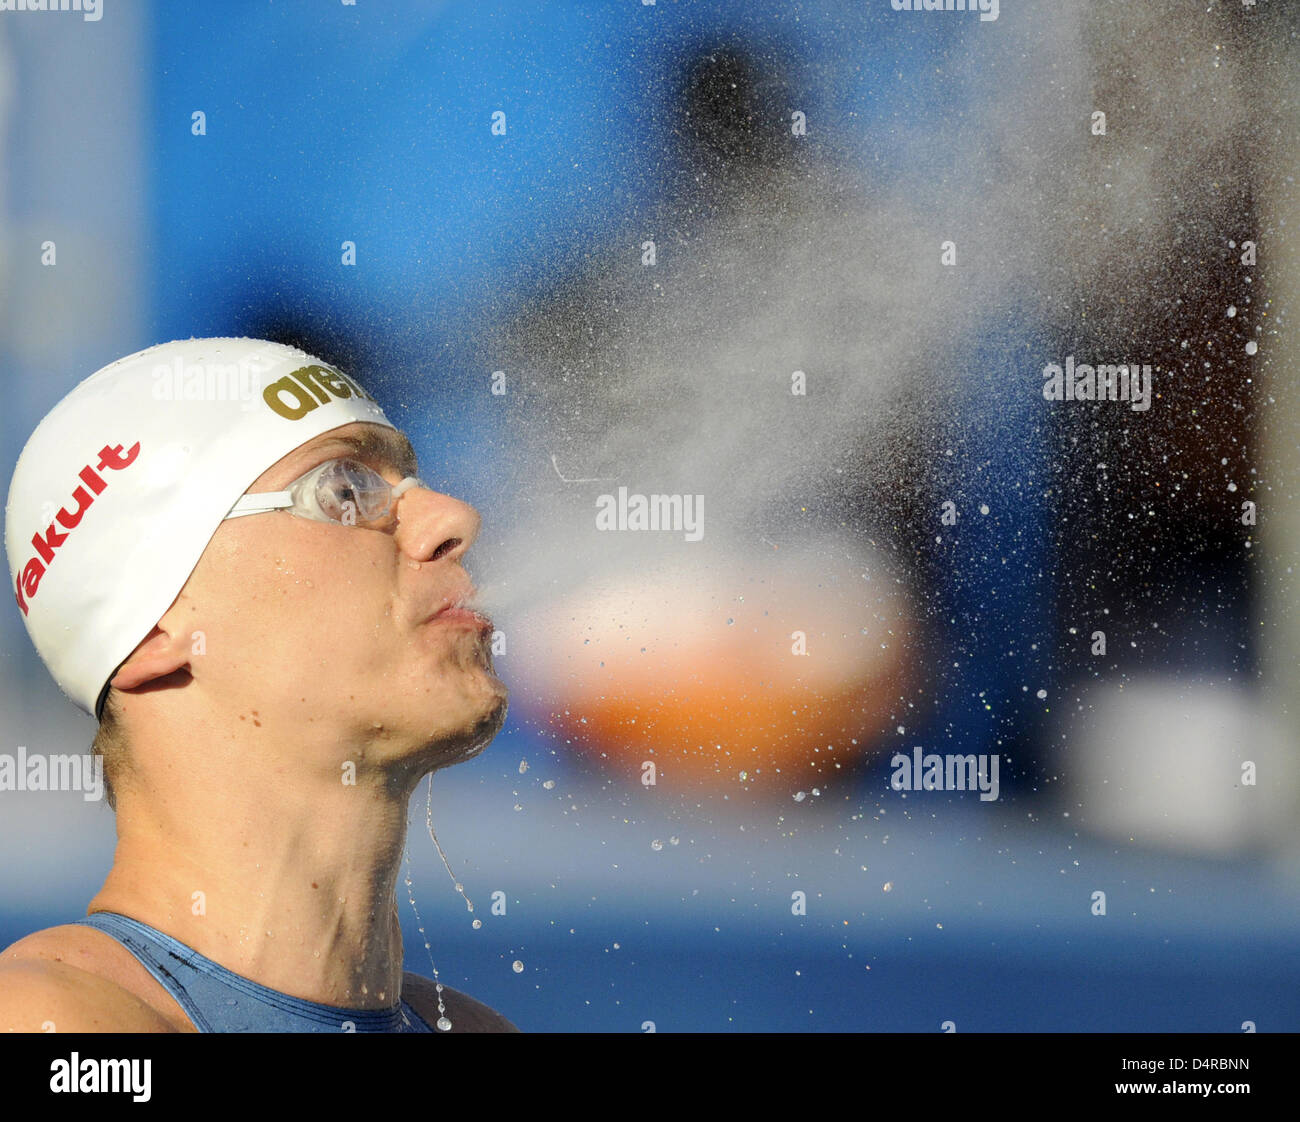 Brazilian Swimmer Cesar Cielo Filho Prepares For The Men S 50m Freestyle Competition At The Fina Swimming World Championships At Foro Italico In Rome Italy 01 August 2009 Filho Won The Competition And